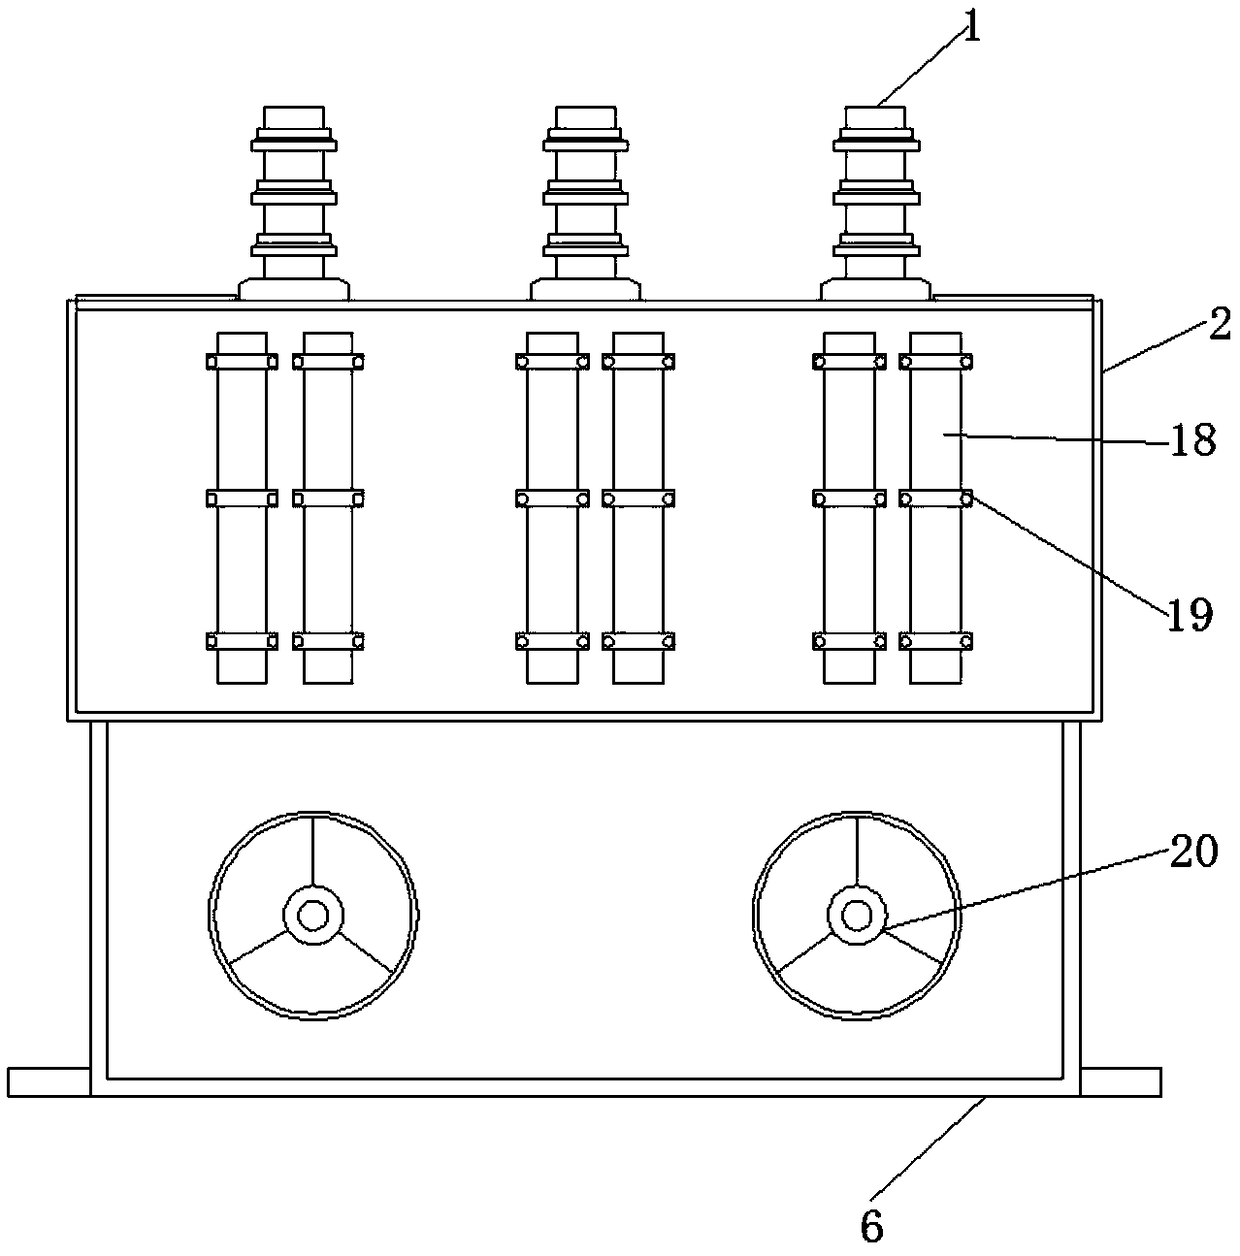 A transformer with strong heat dissipation